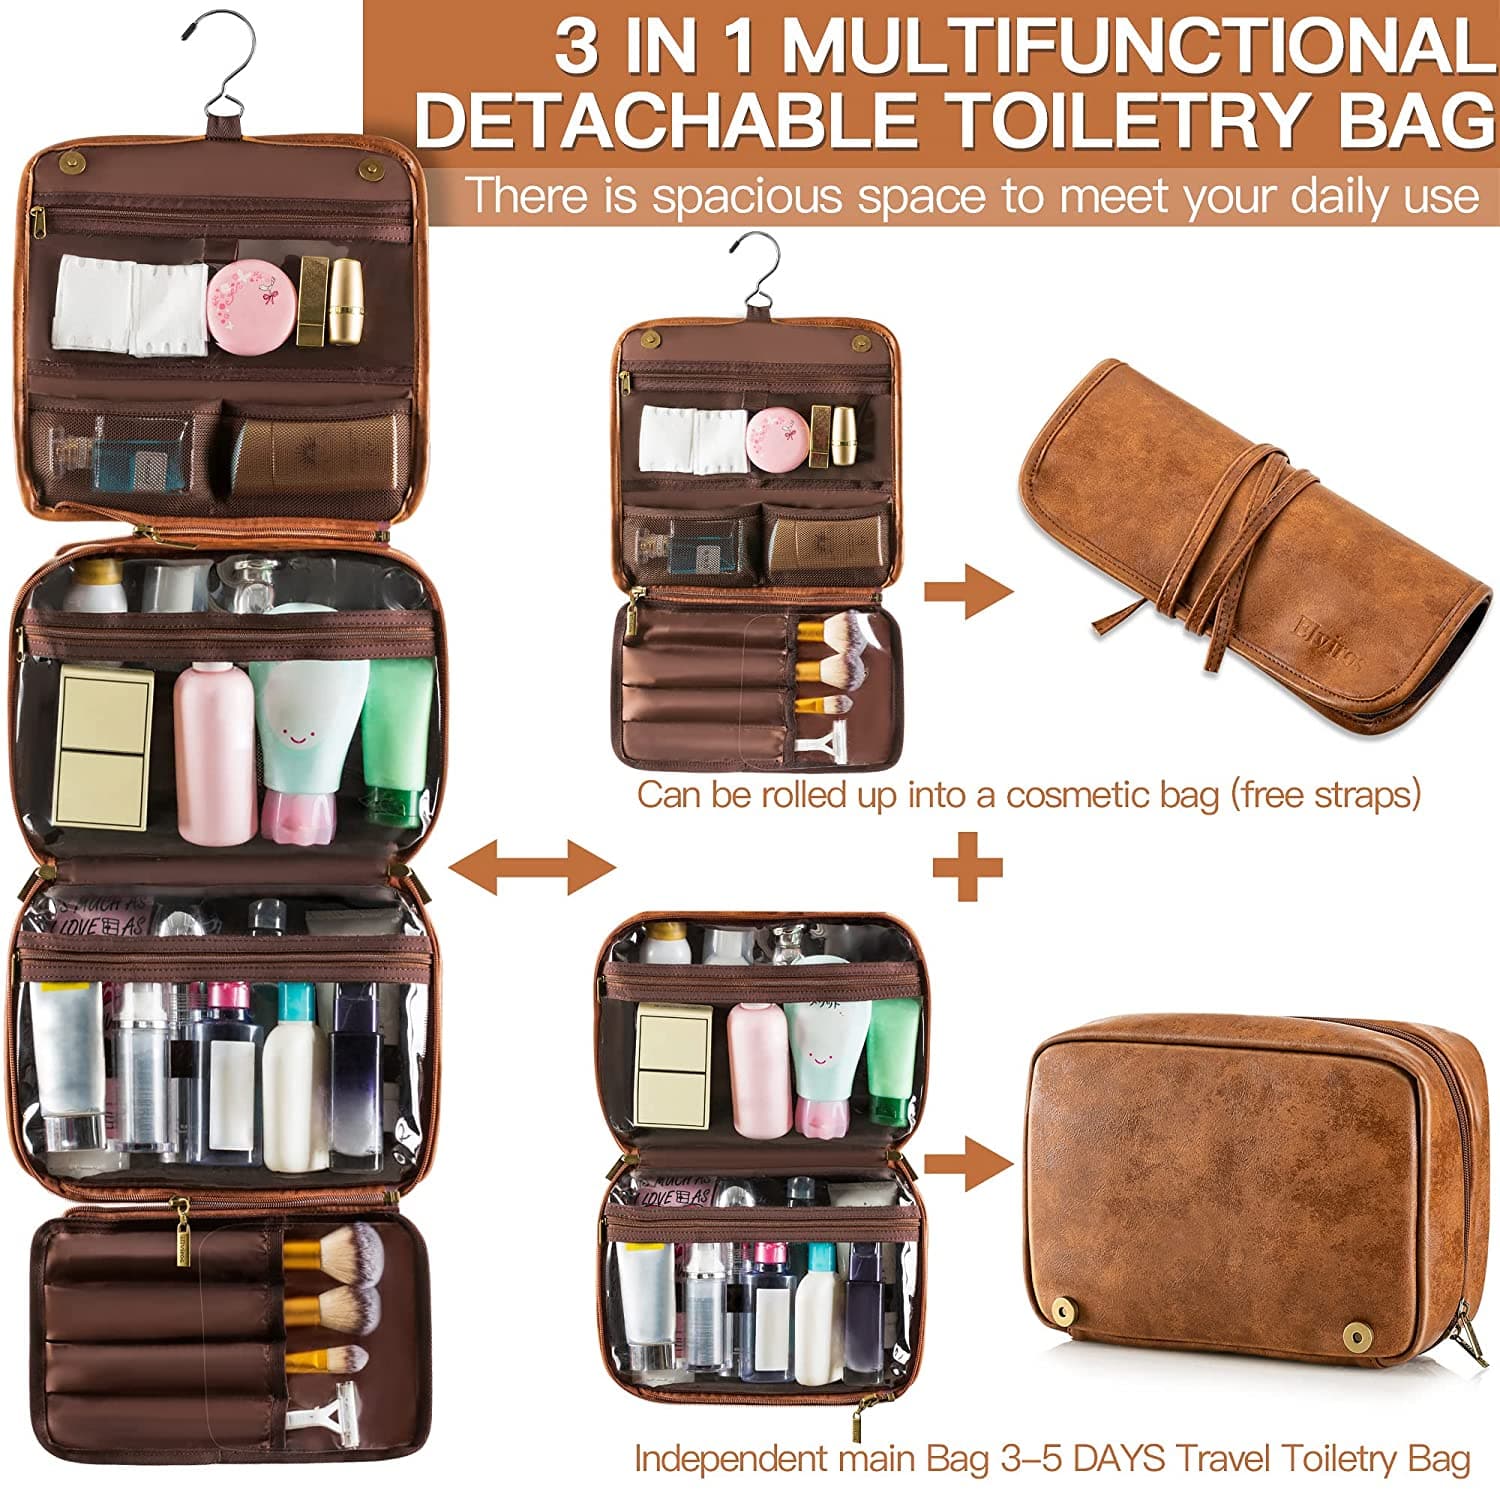 Shop for the Perfect Travel Organizer or Toiletry Bag